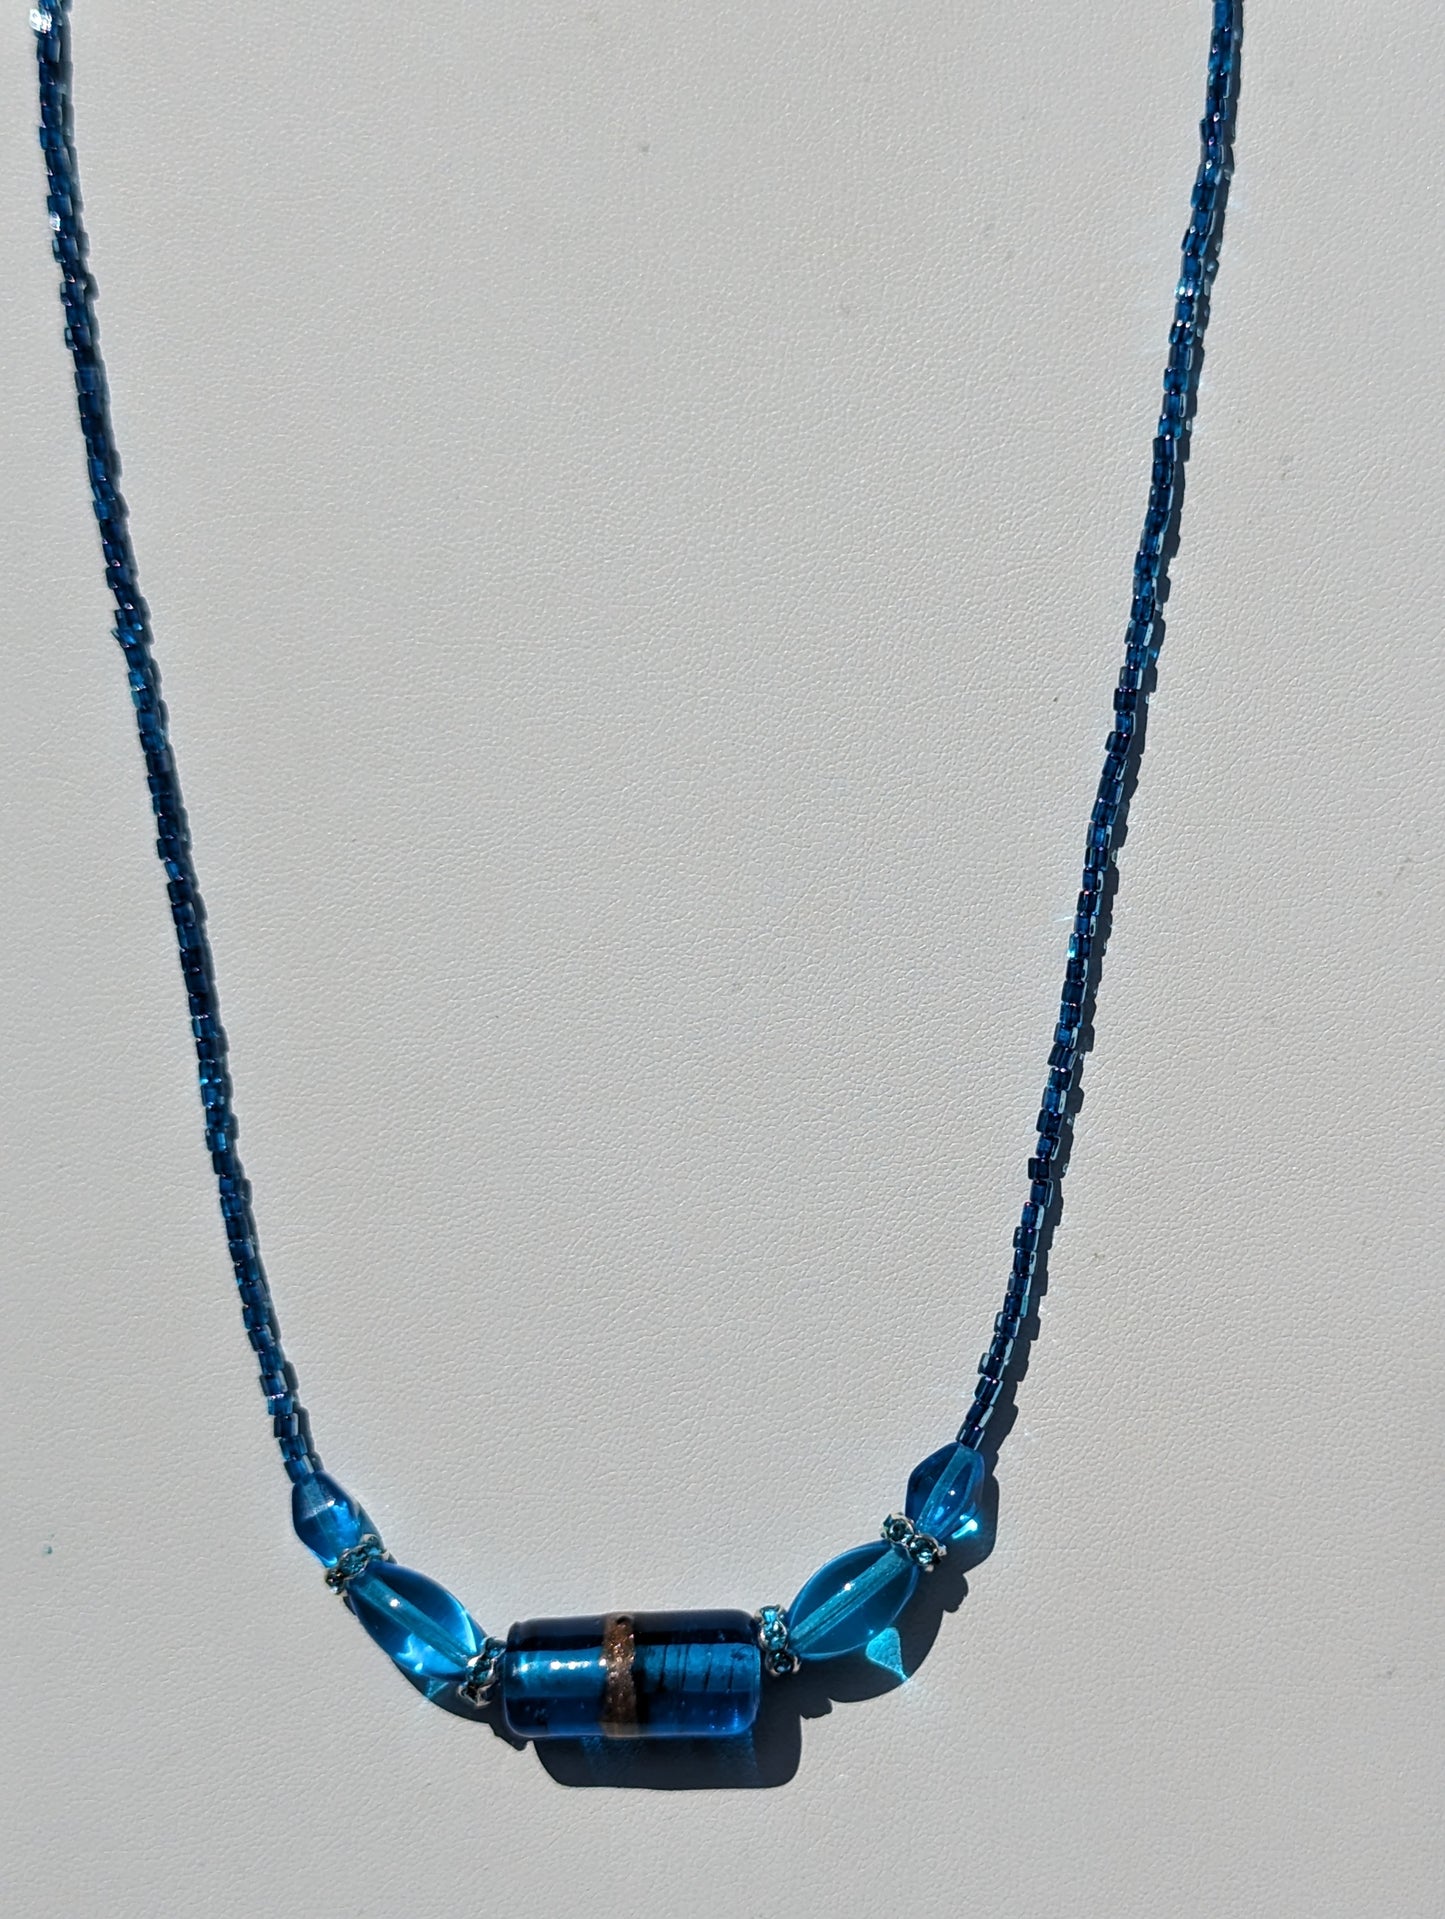 Shades of Aquamarine and Teal Beaded Necklace